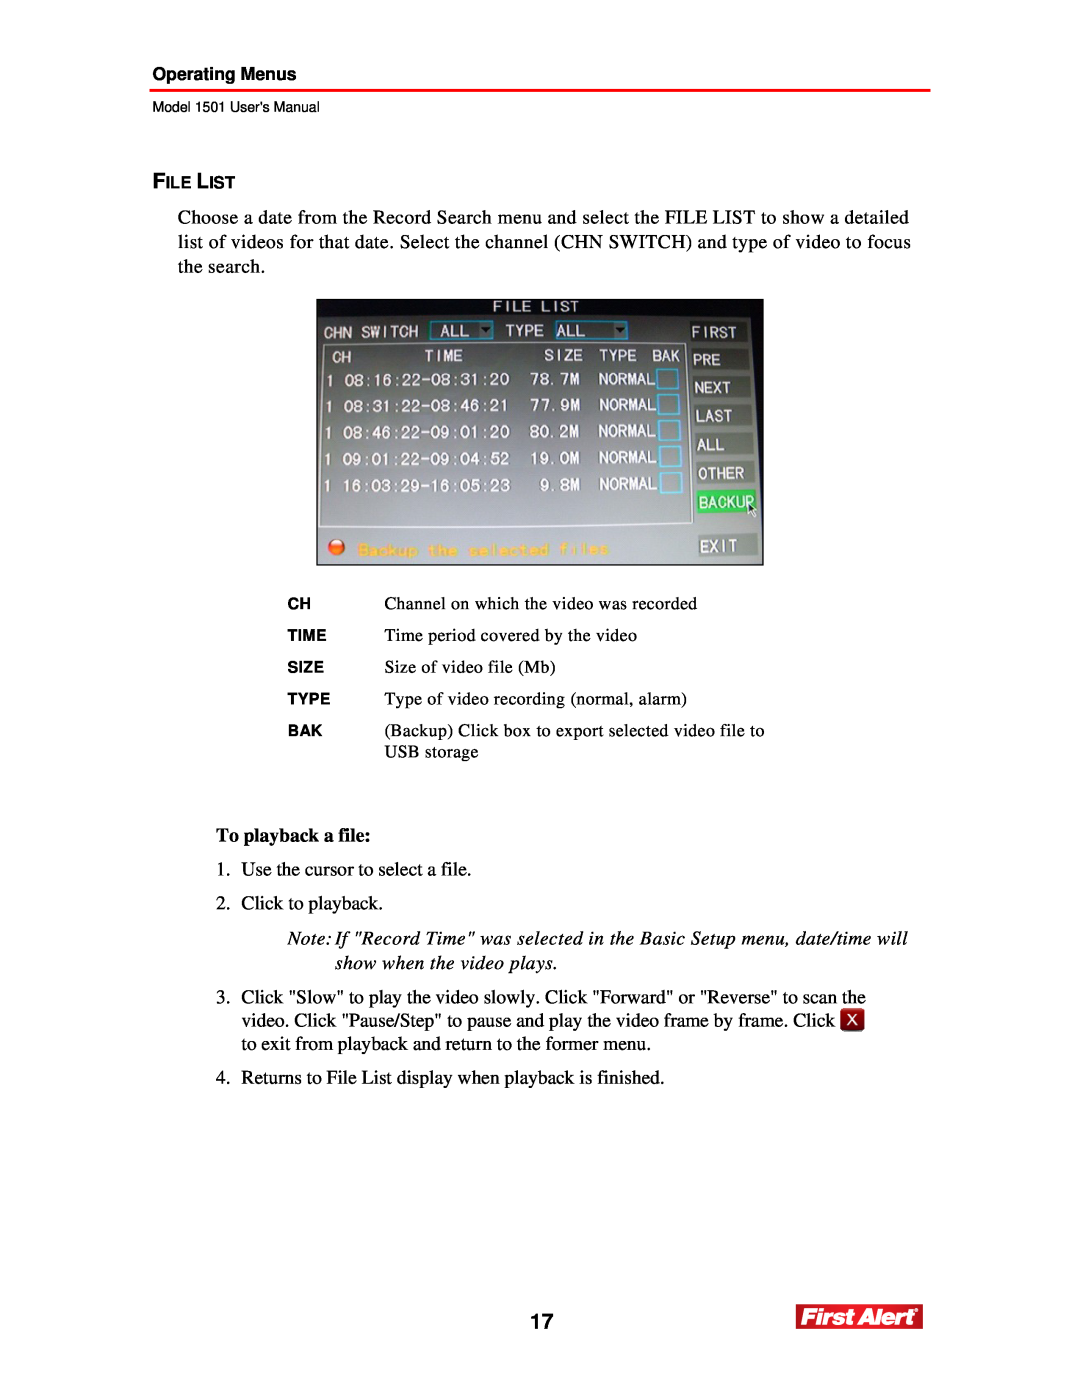 First Alert 1501 user manual To playback a file 